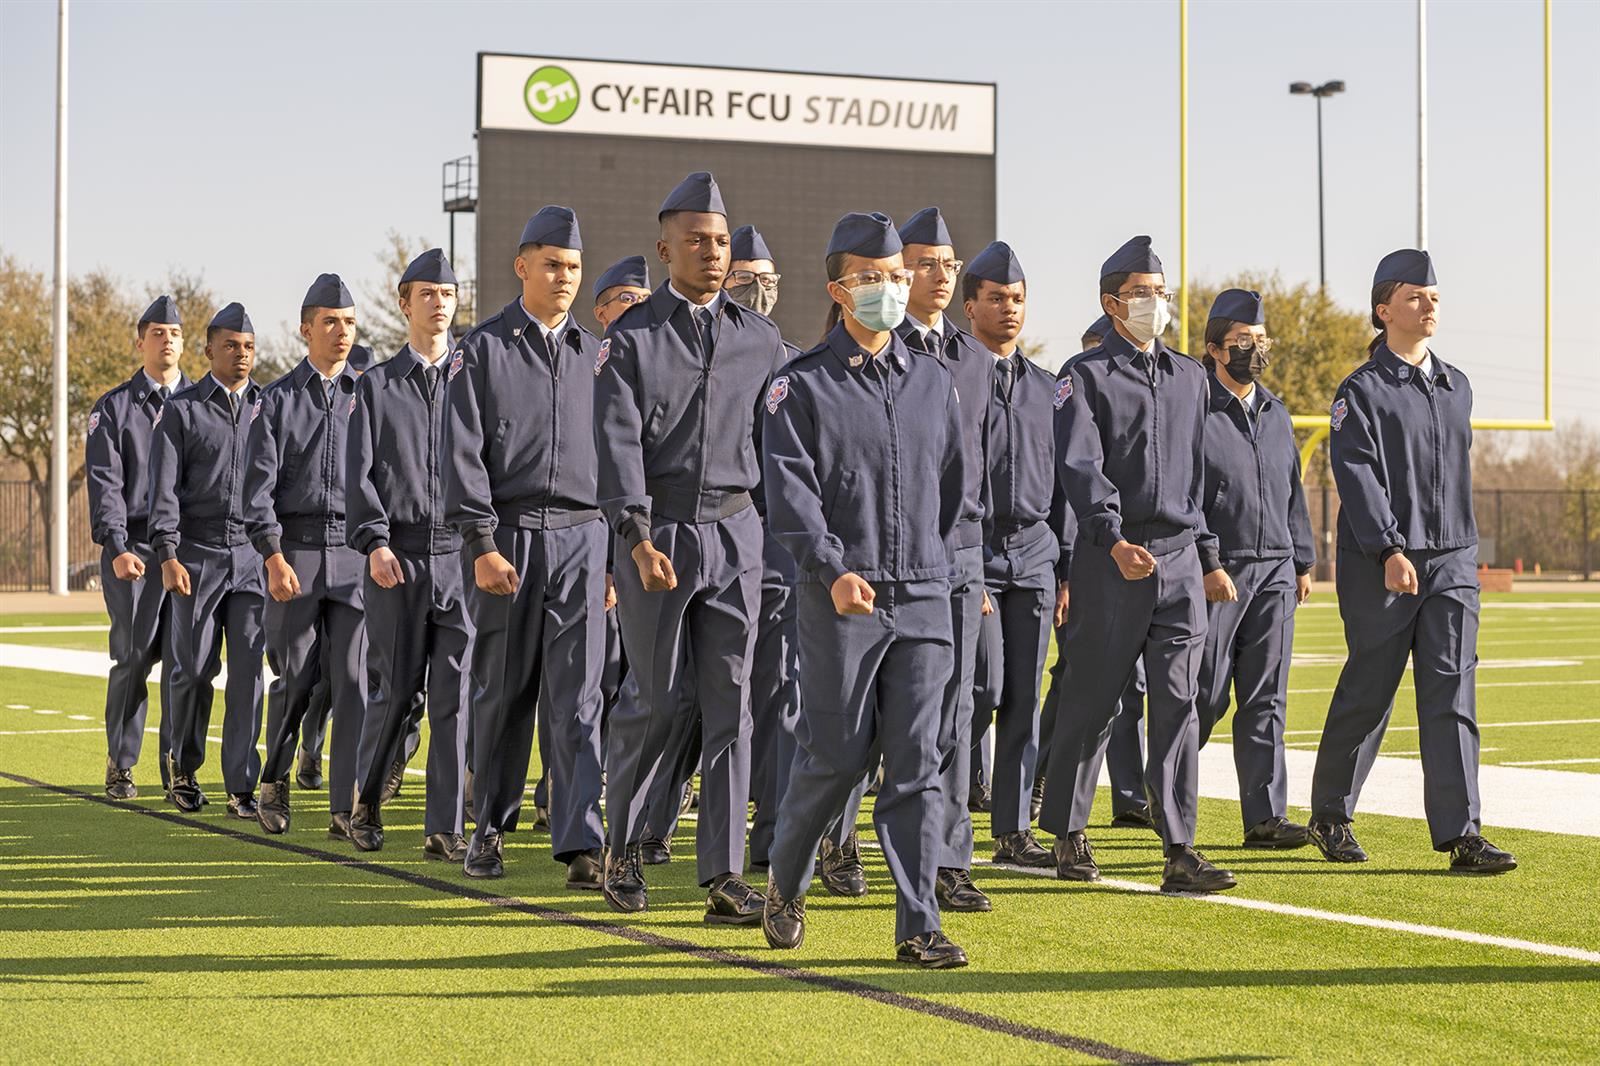 Each of the district’s nine Air Force Junior ROTC units marched in front of the many guests and dignitaries in attendance.